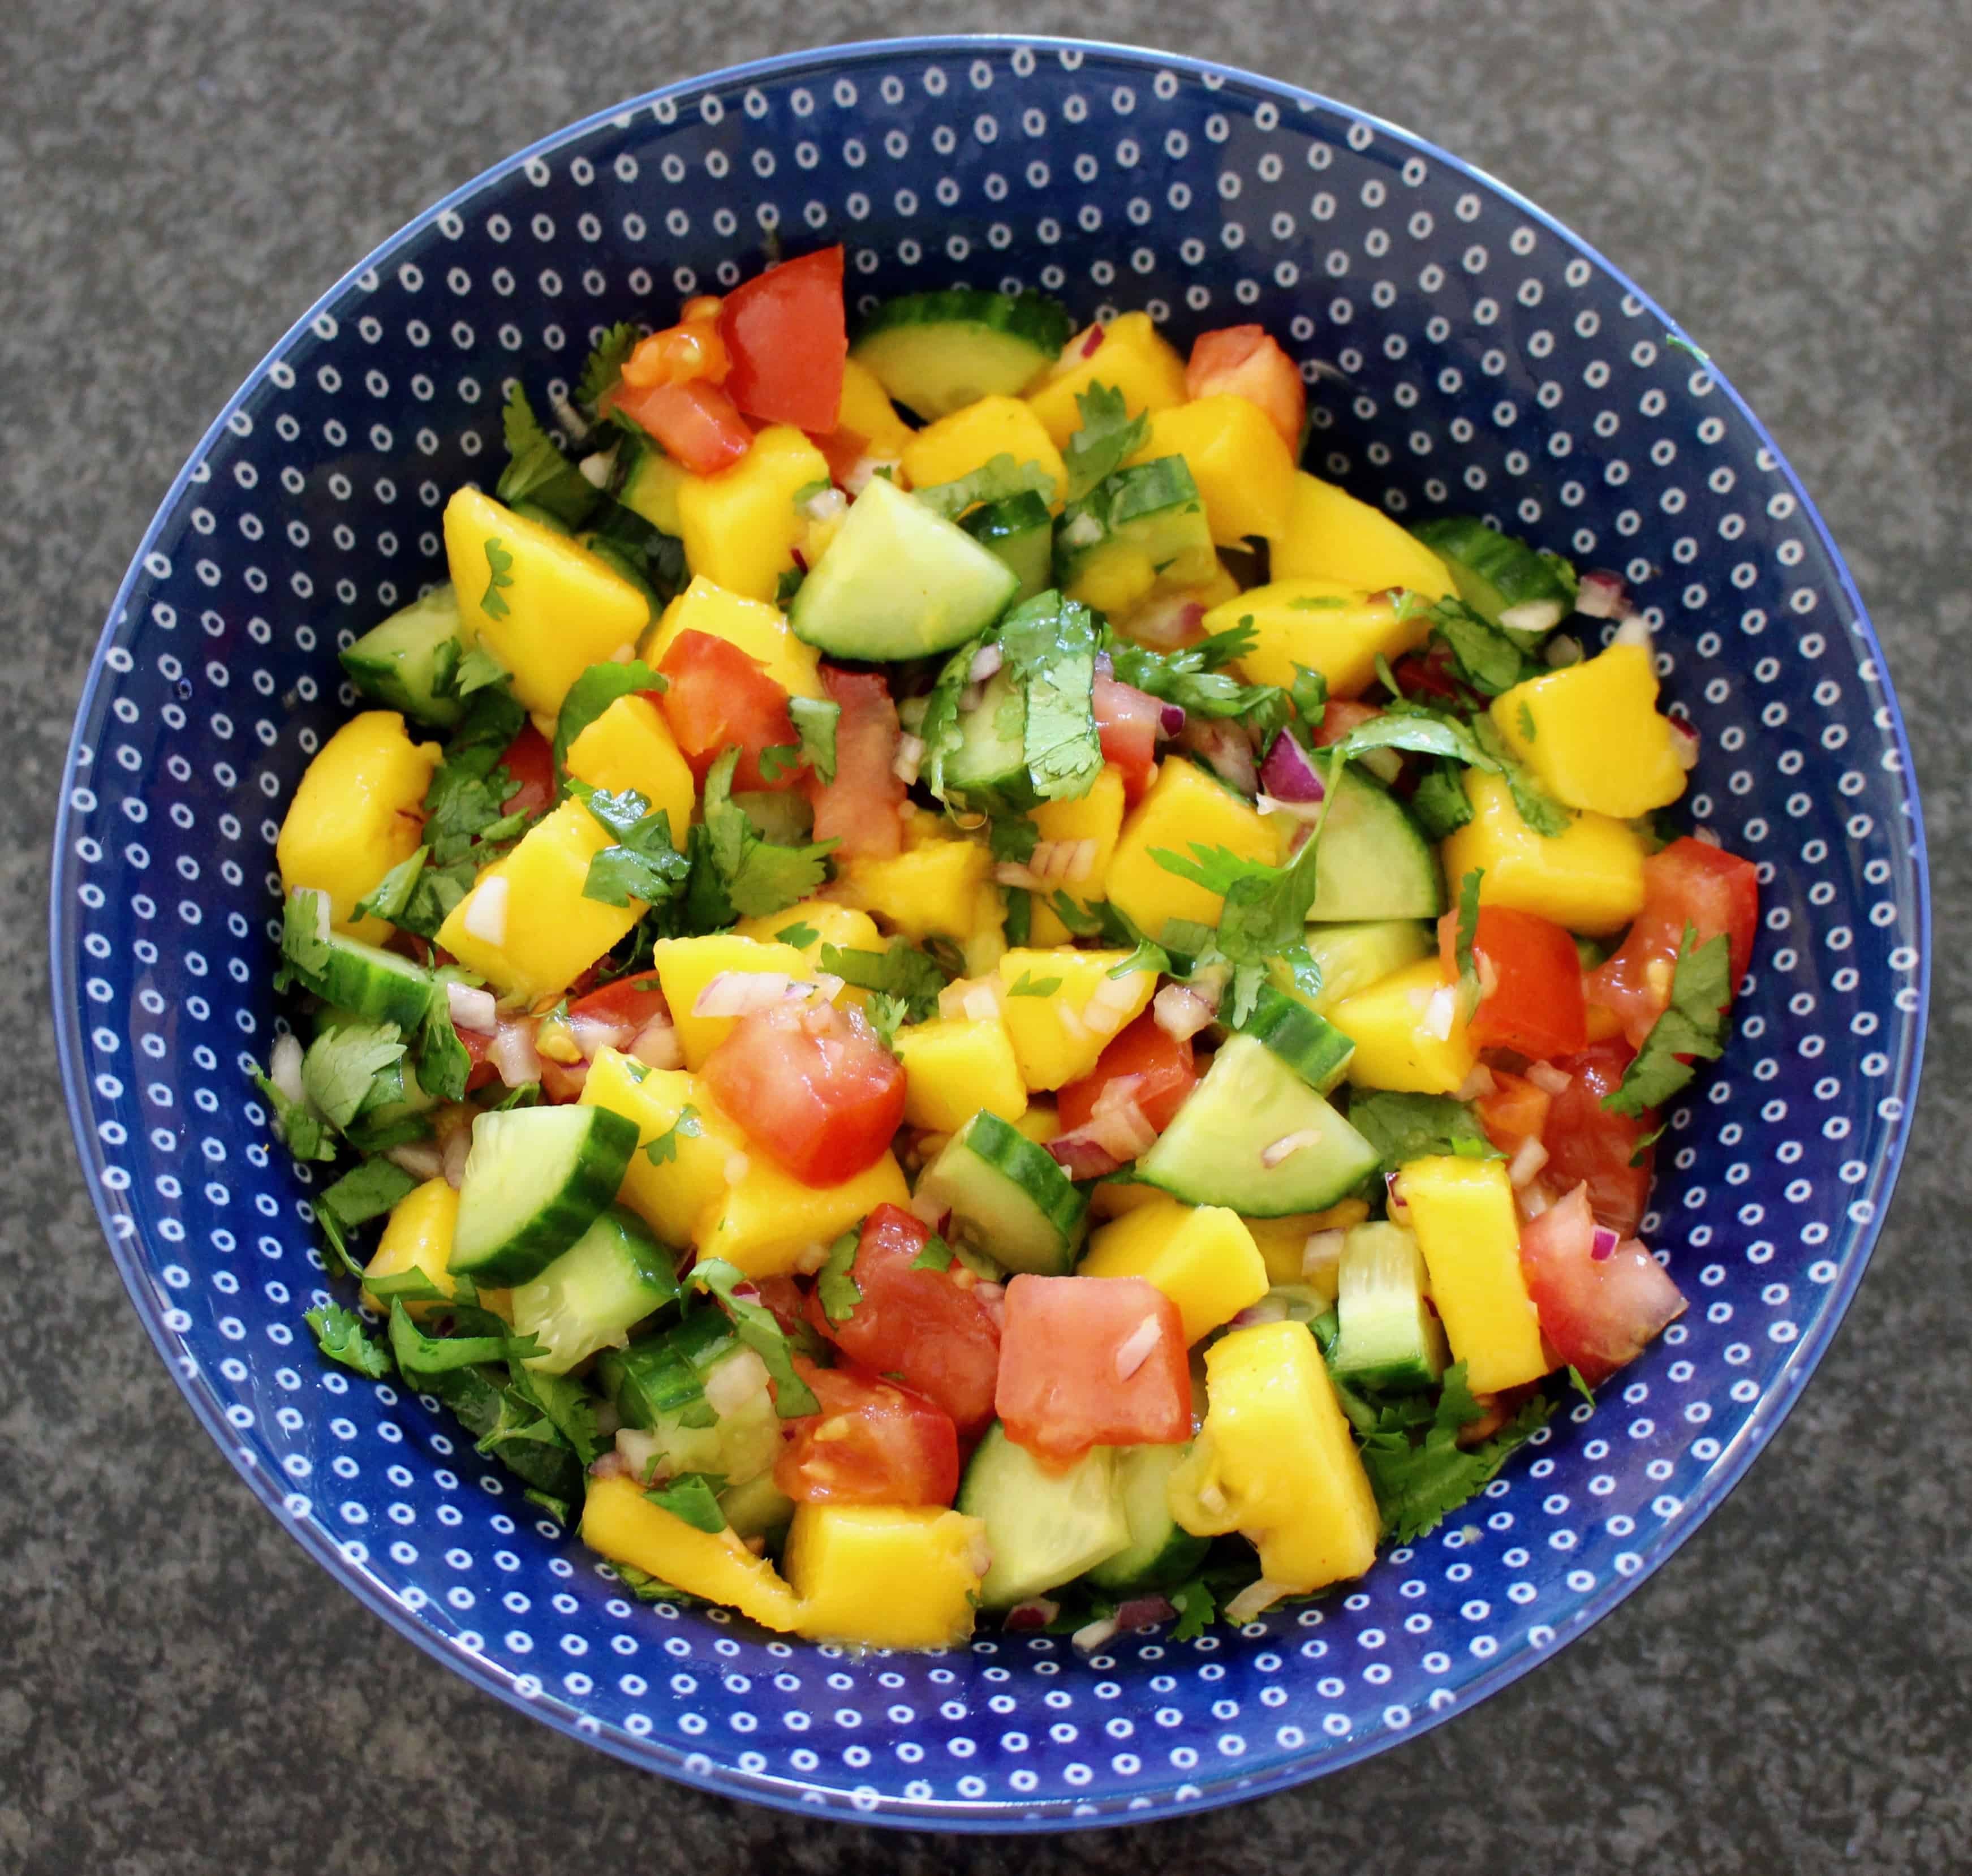 Chopped mango, tomatoes, cucumber and coriander in a blue bowl against a granite background